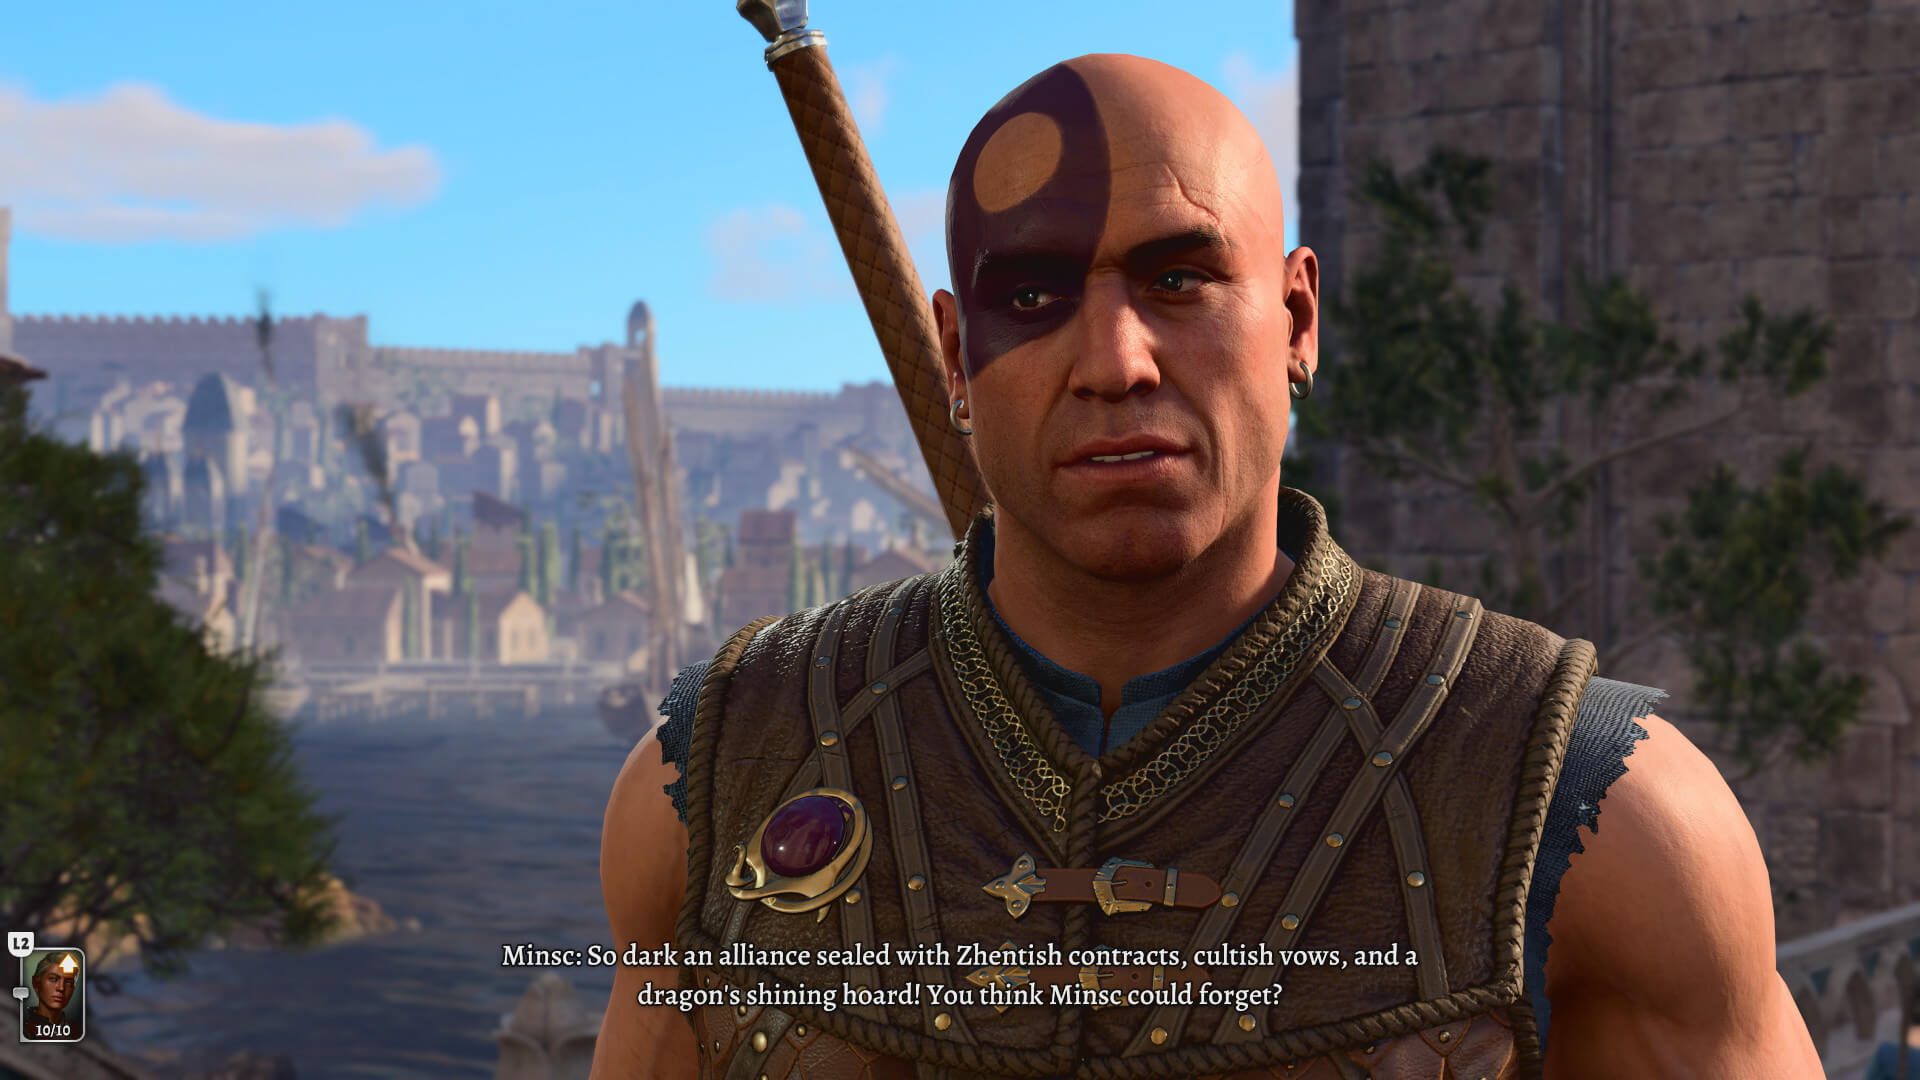 Baldur’s Gate 3 screenshot of a face-tattooed human character with walled city in the background.